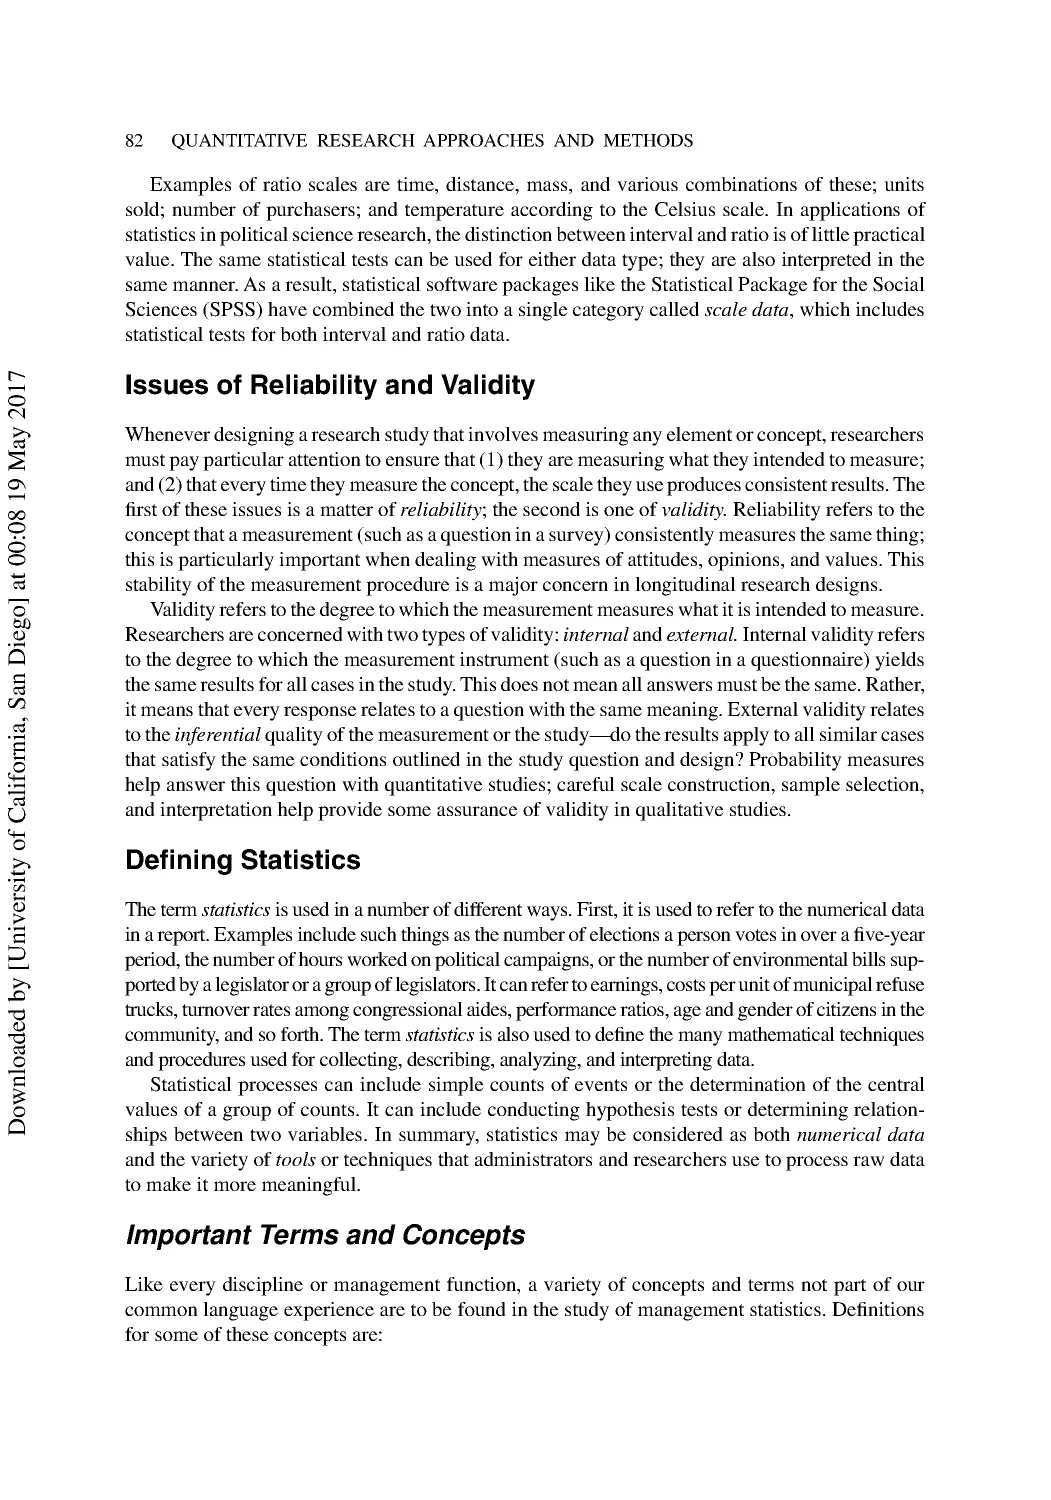 Issues of Reliability and Validity
Defining Statistics